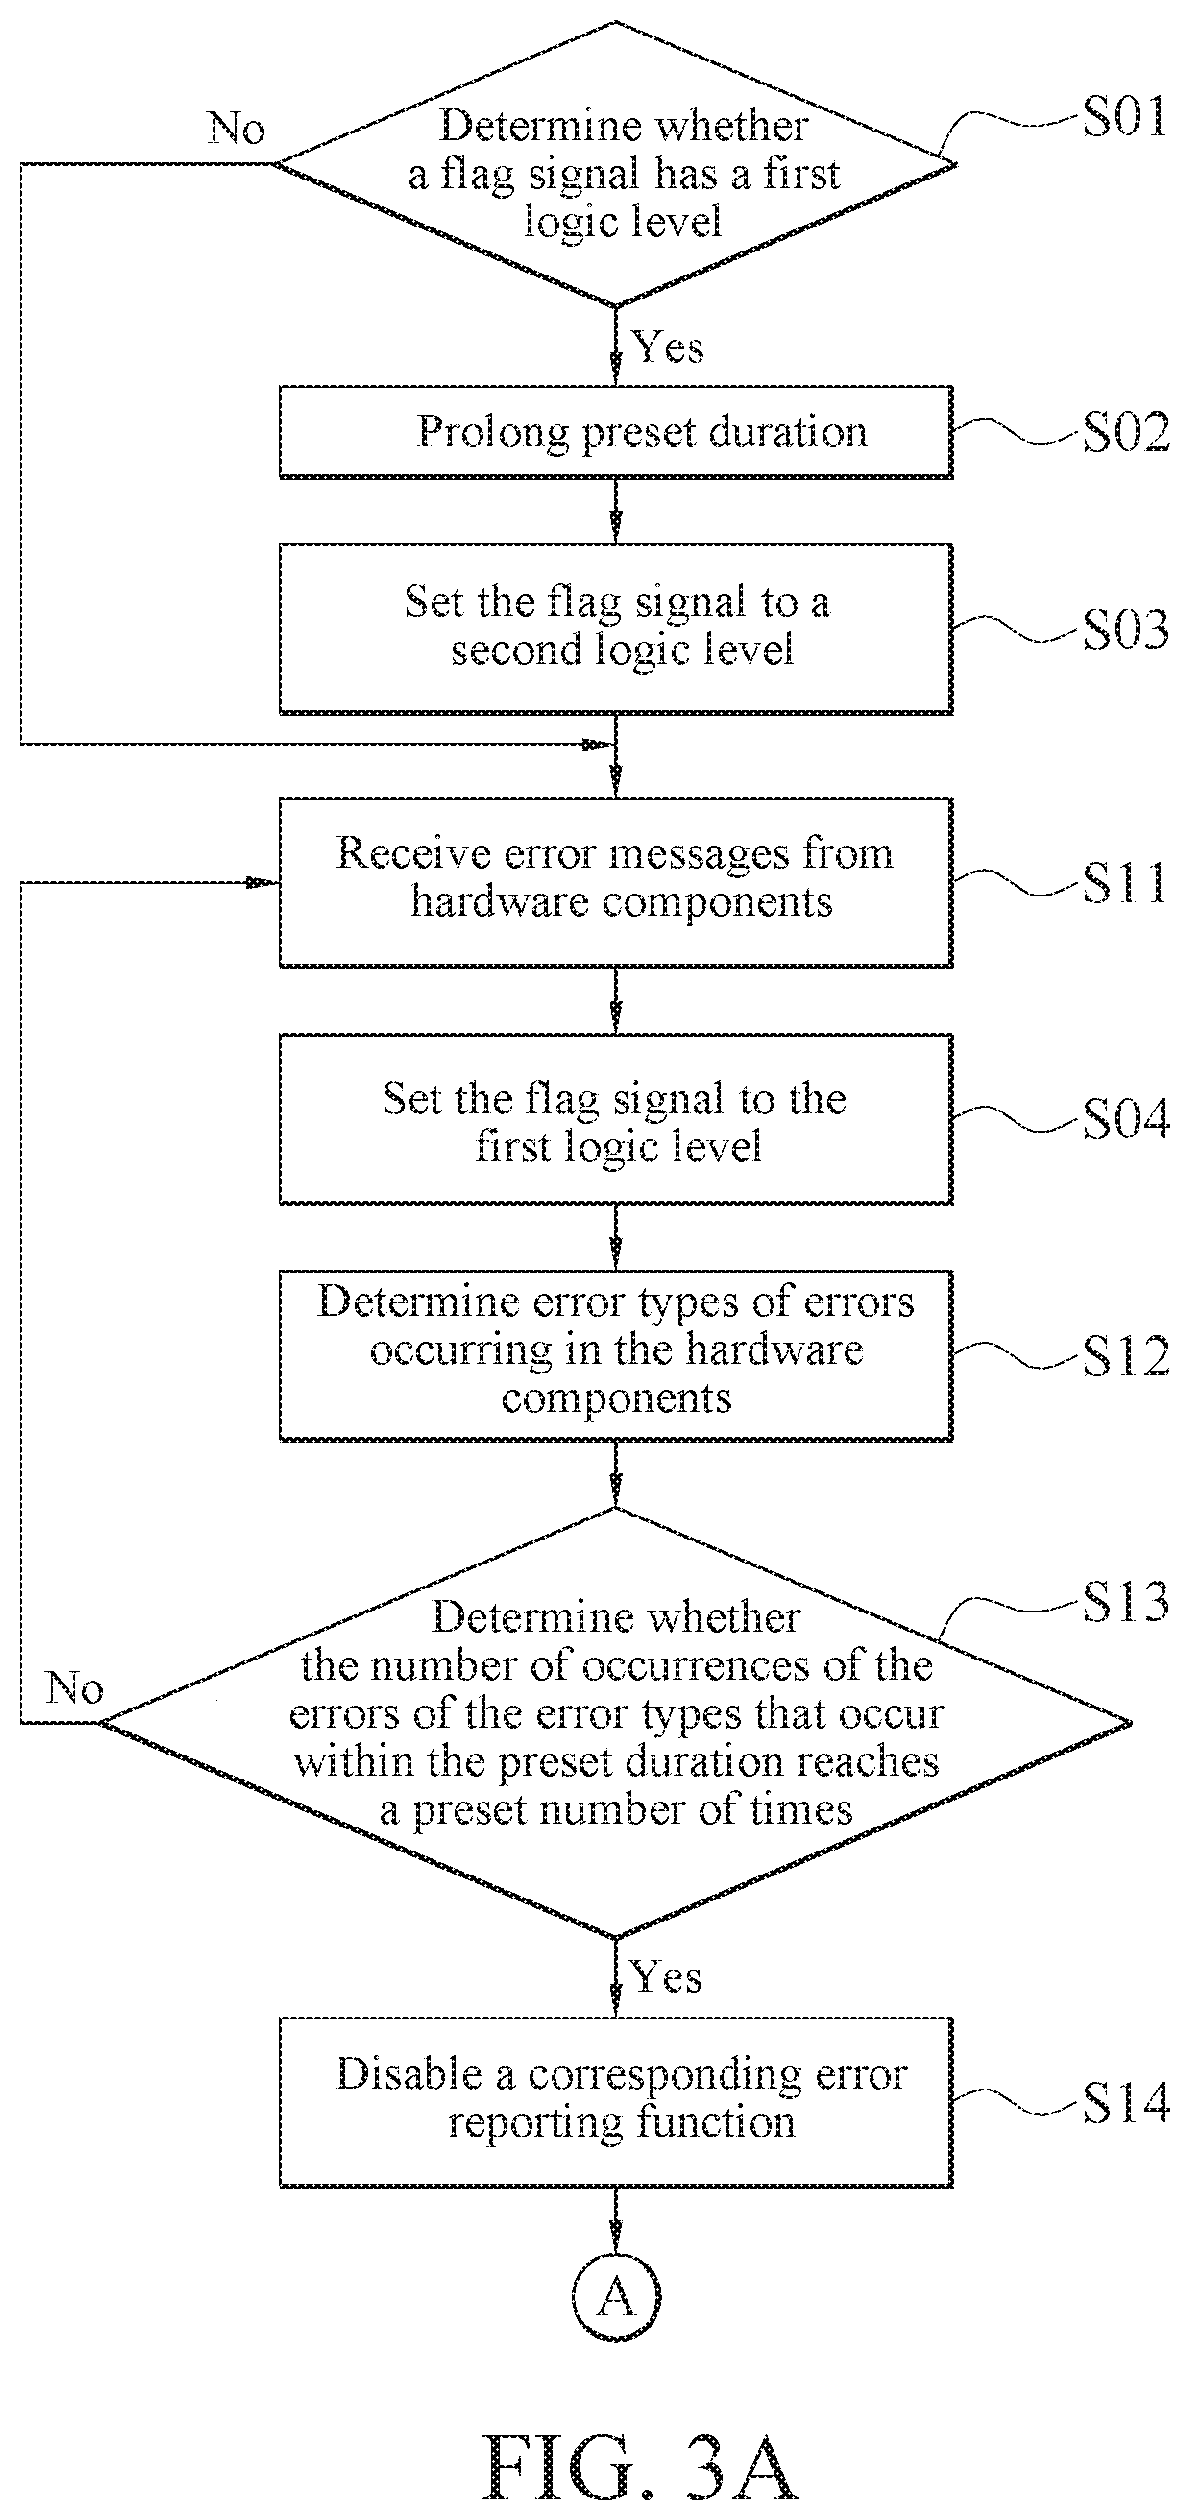 Method for controlling correctable error reporting function for server device